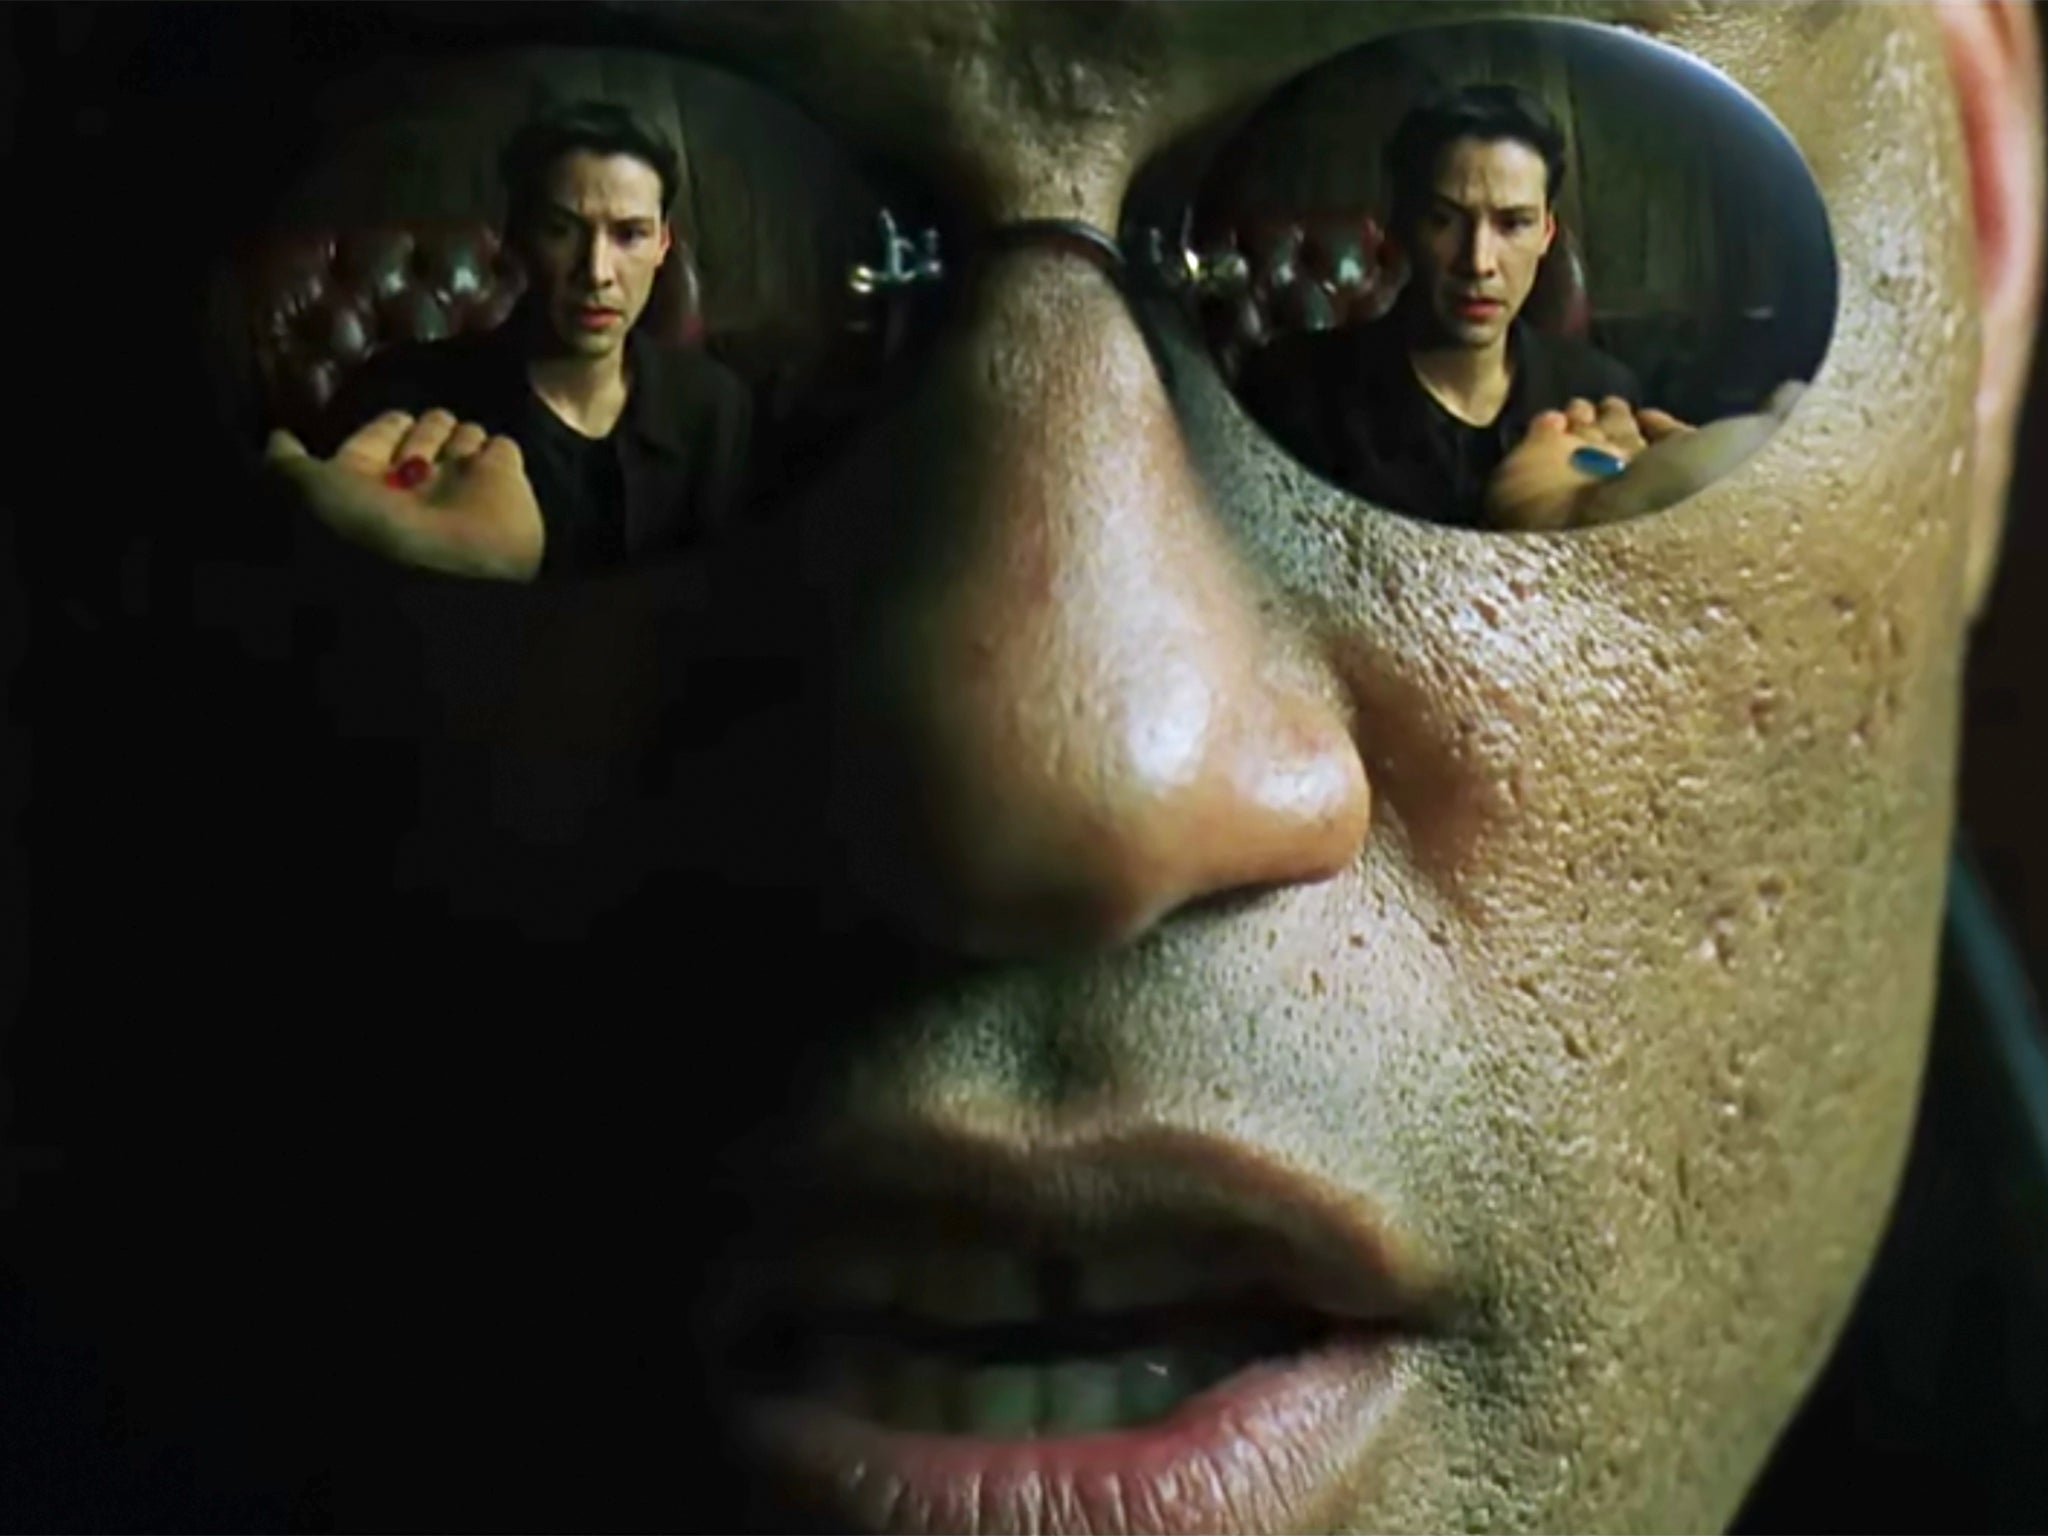 Red-pilled: Can The Matrix Resurrections reclaim Neo from the alt-right? Independent